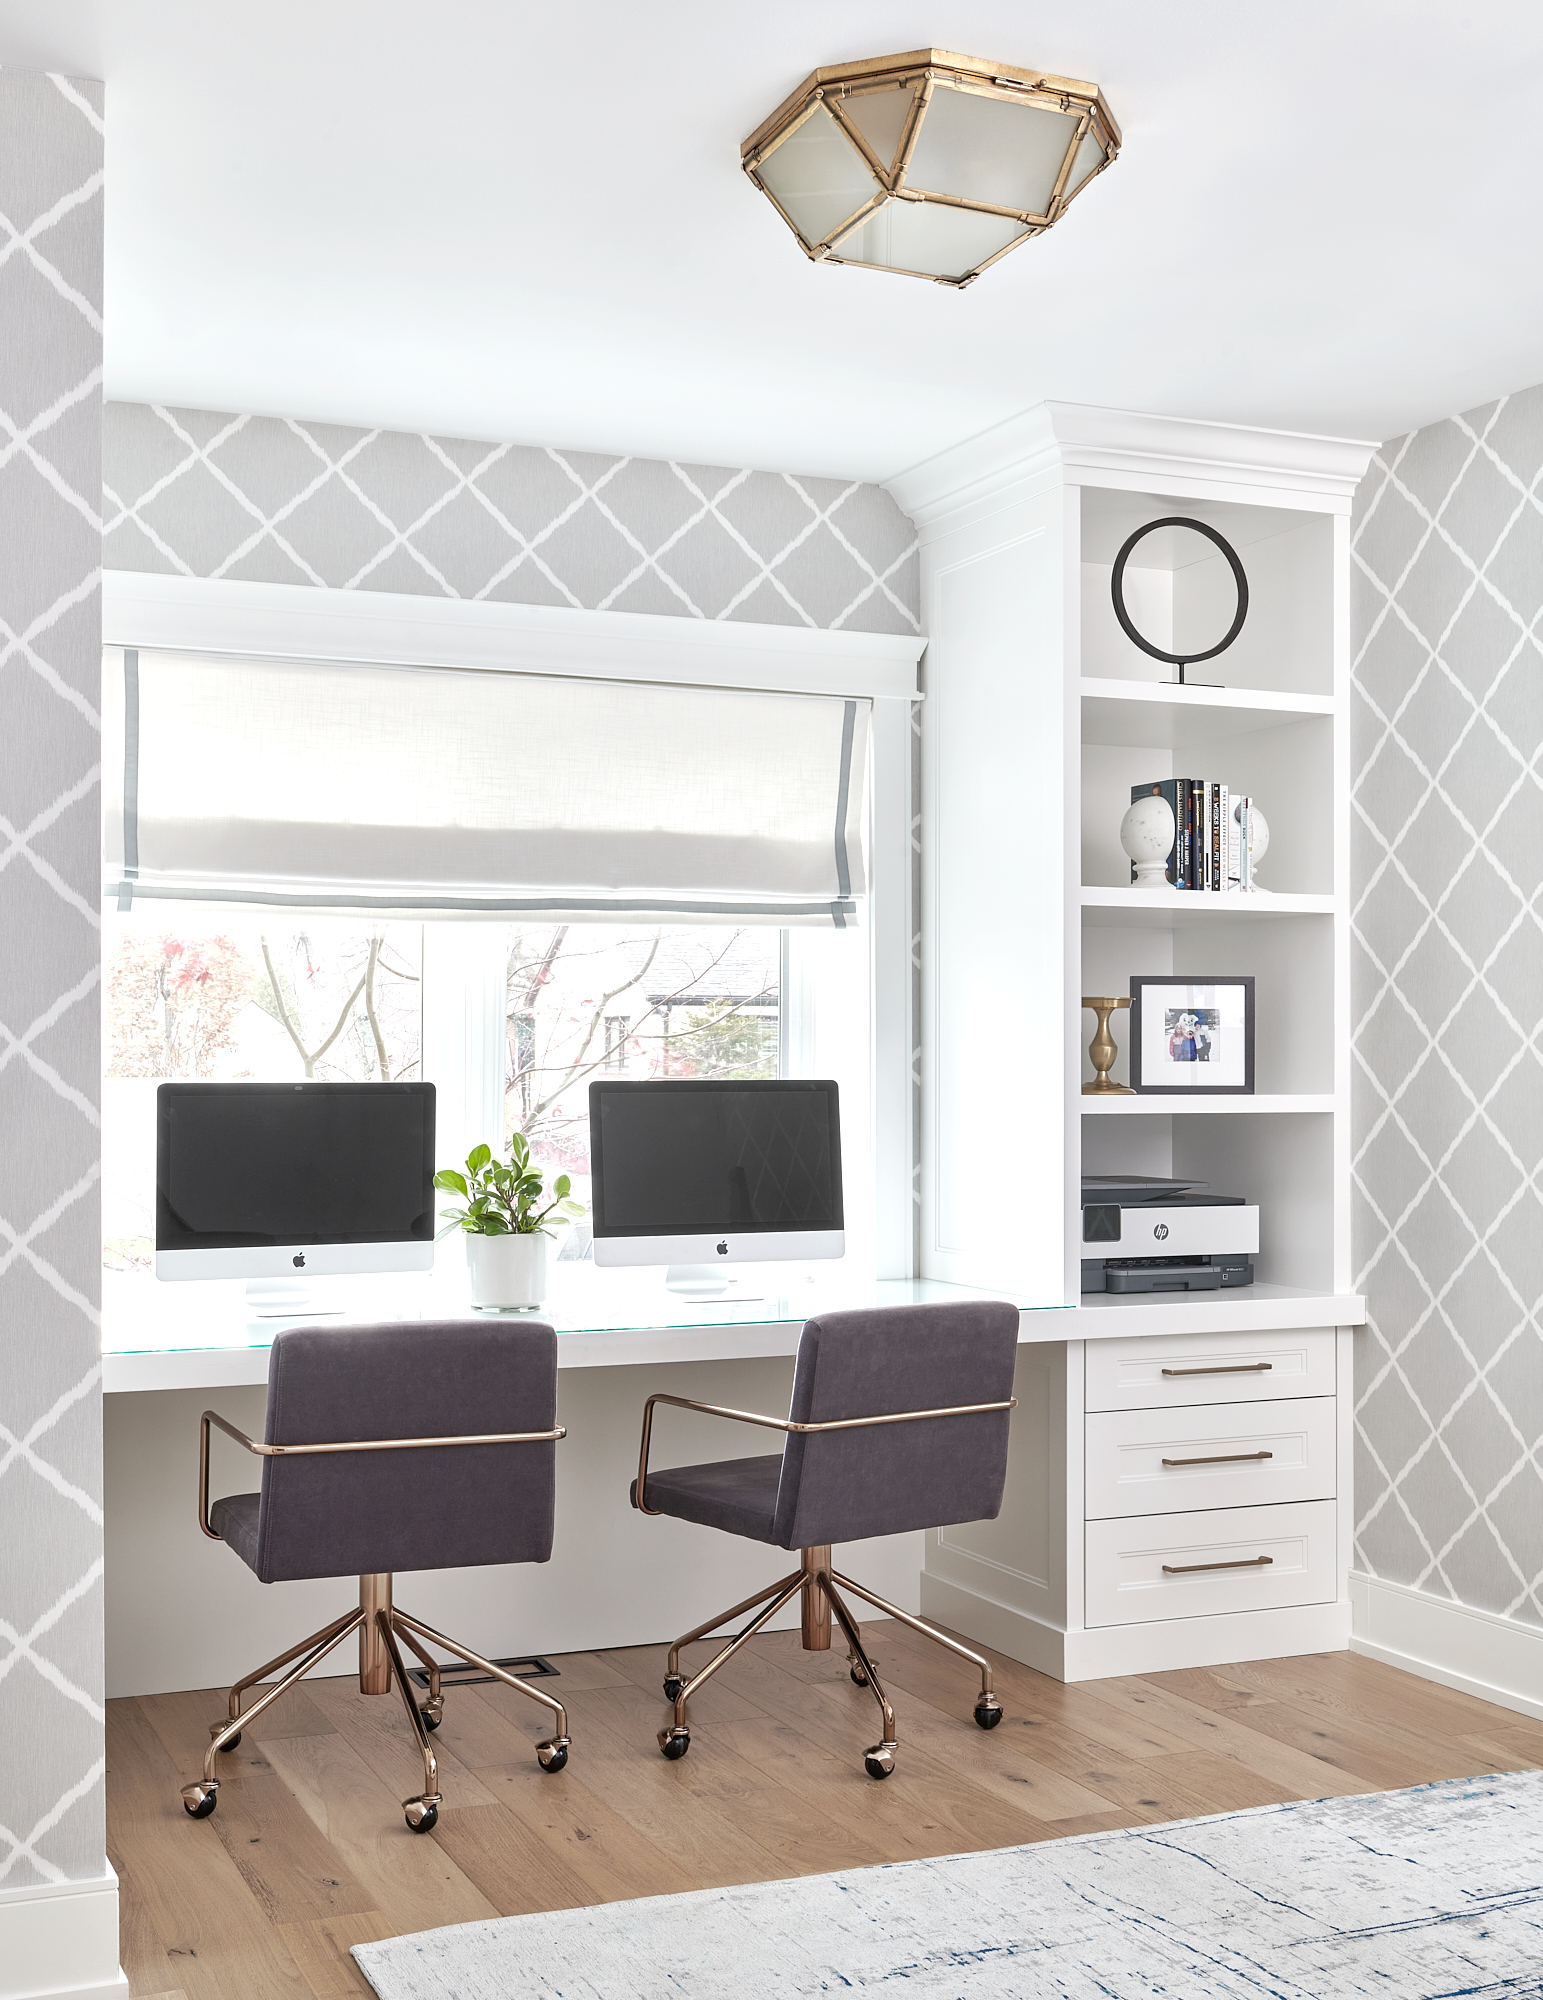 beautiful toronto home office designed by interior designer staci edwards - grey and white wallpaper, custom built in desk in front of window, with two computers and desk chairs